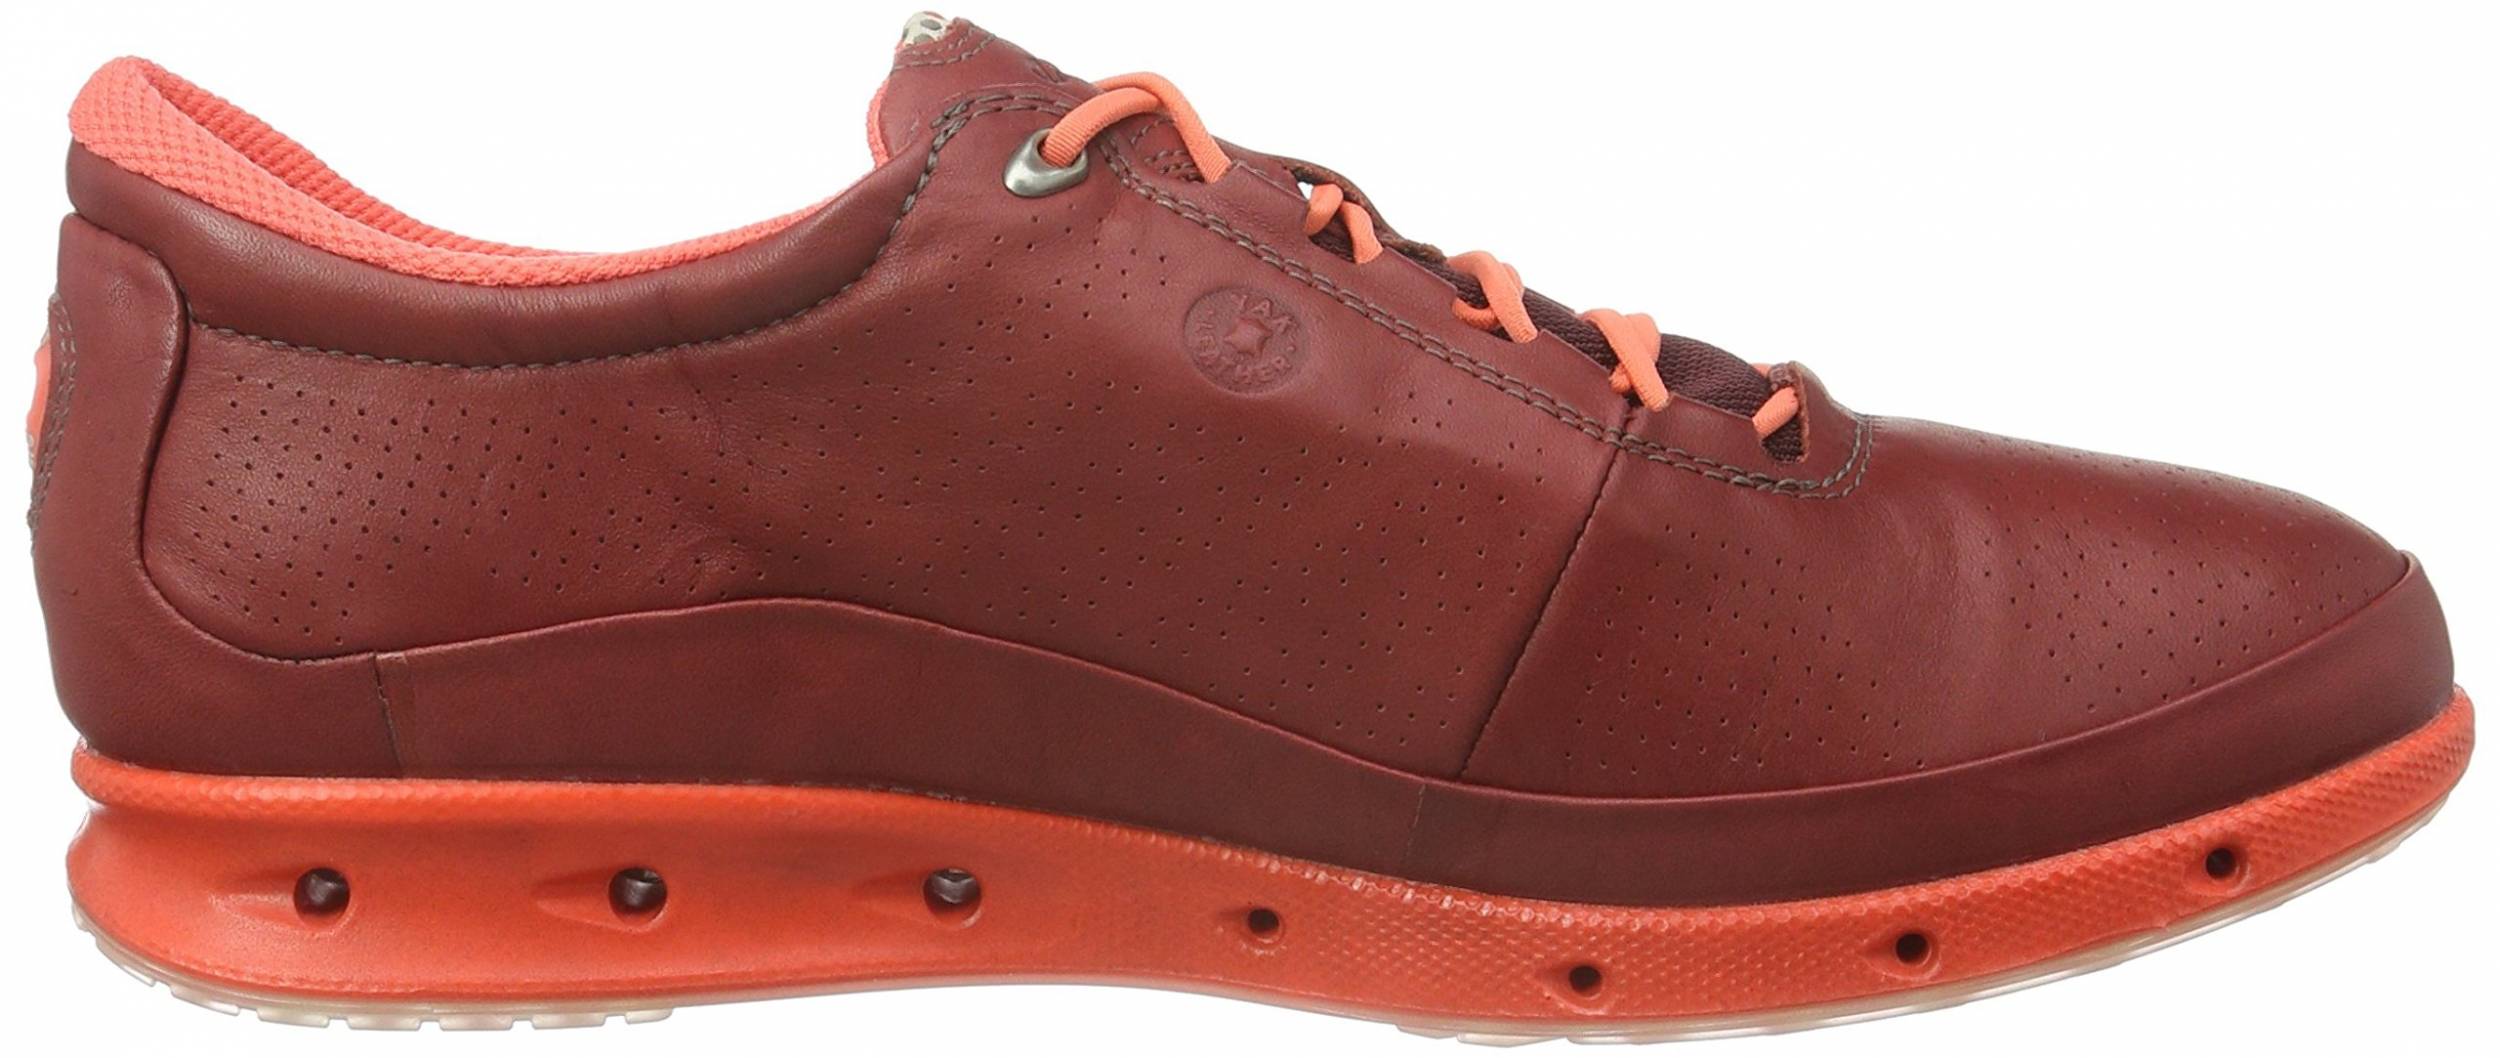 Ecco GTX sneakers (only RunRepeat